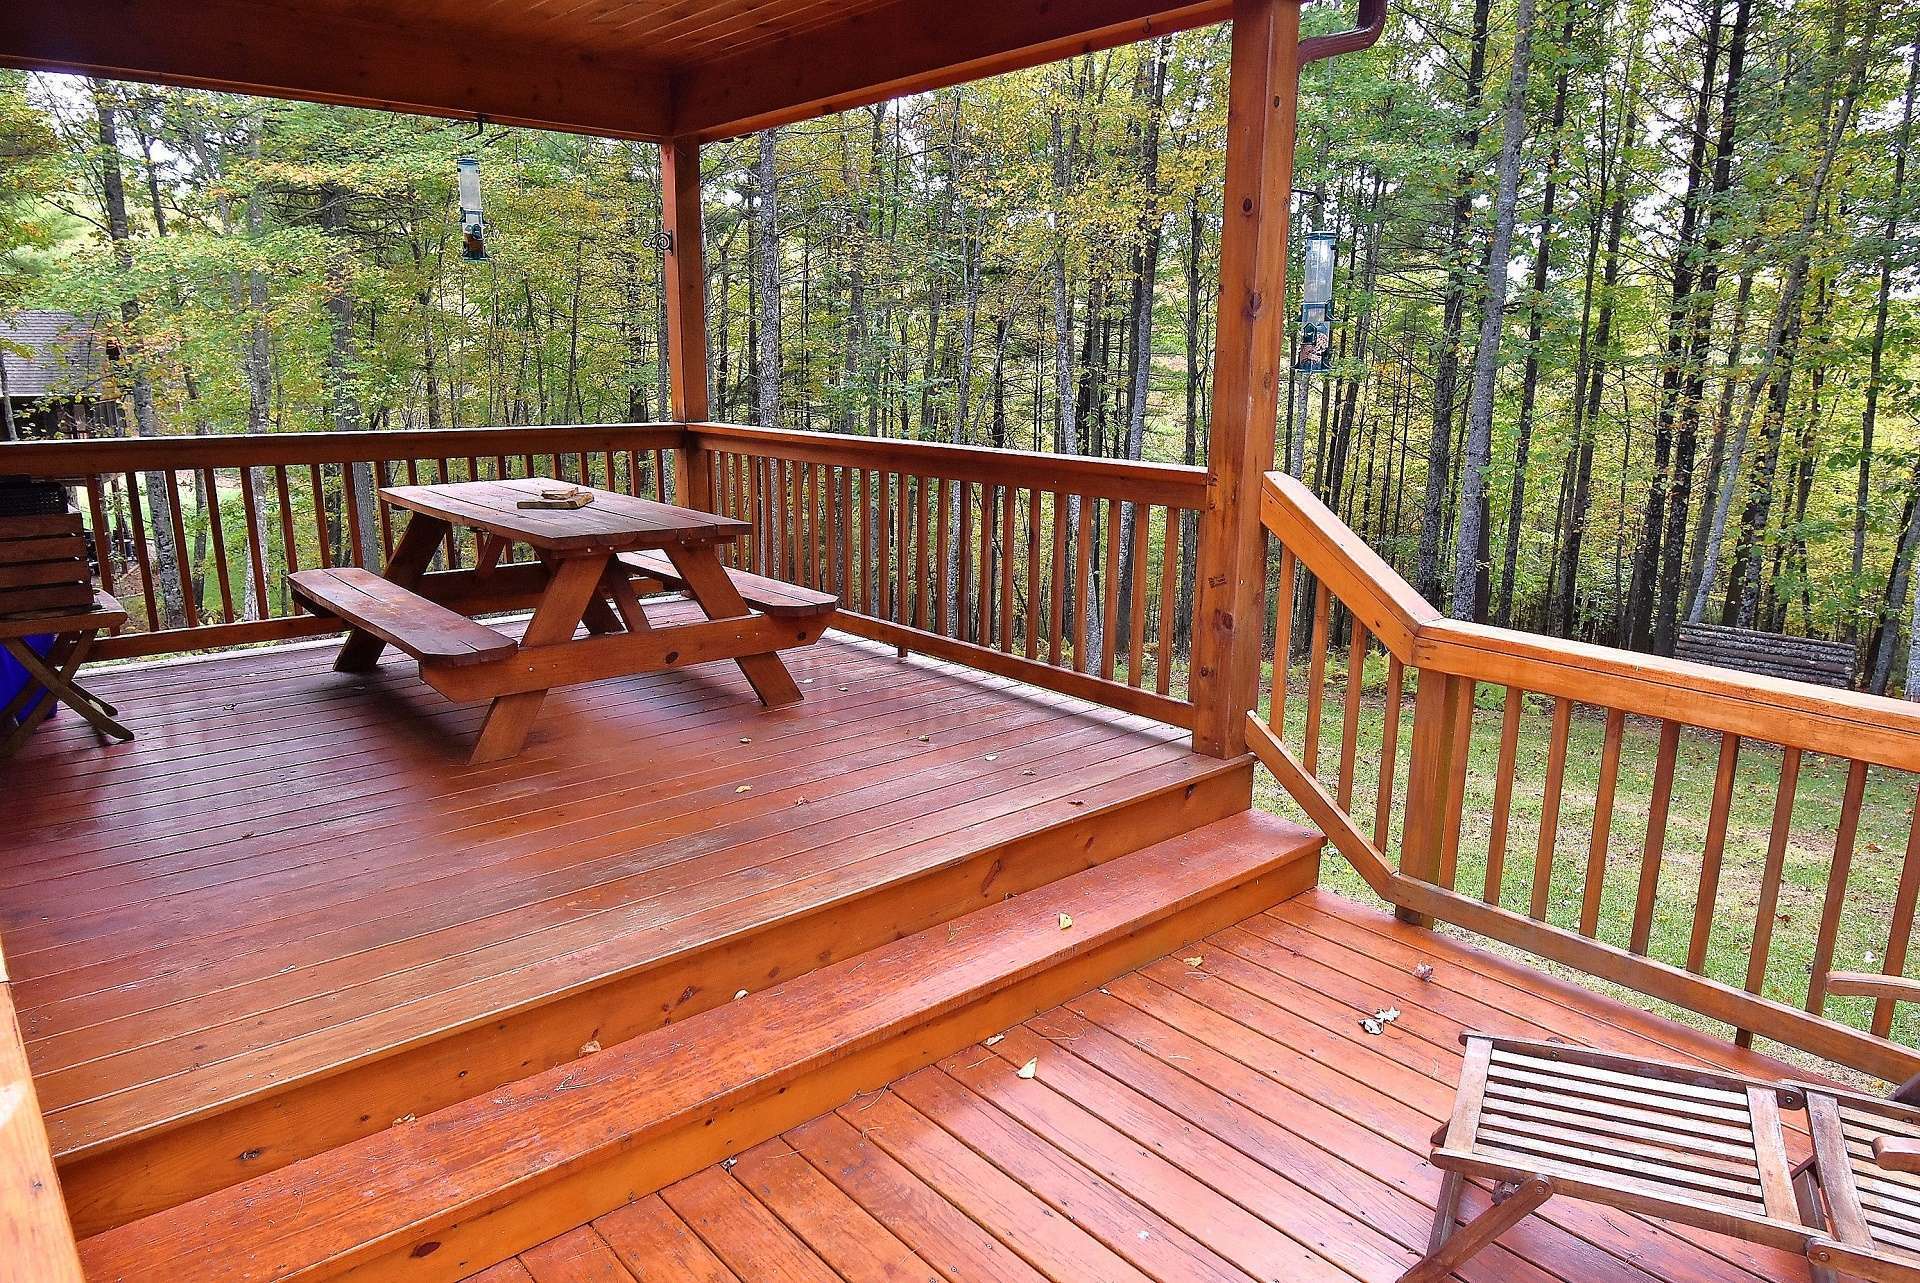 In addition to the covered front porch, this partially covered back deck offers more outdoor entertaining space.